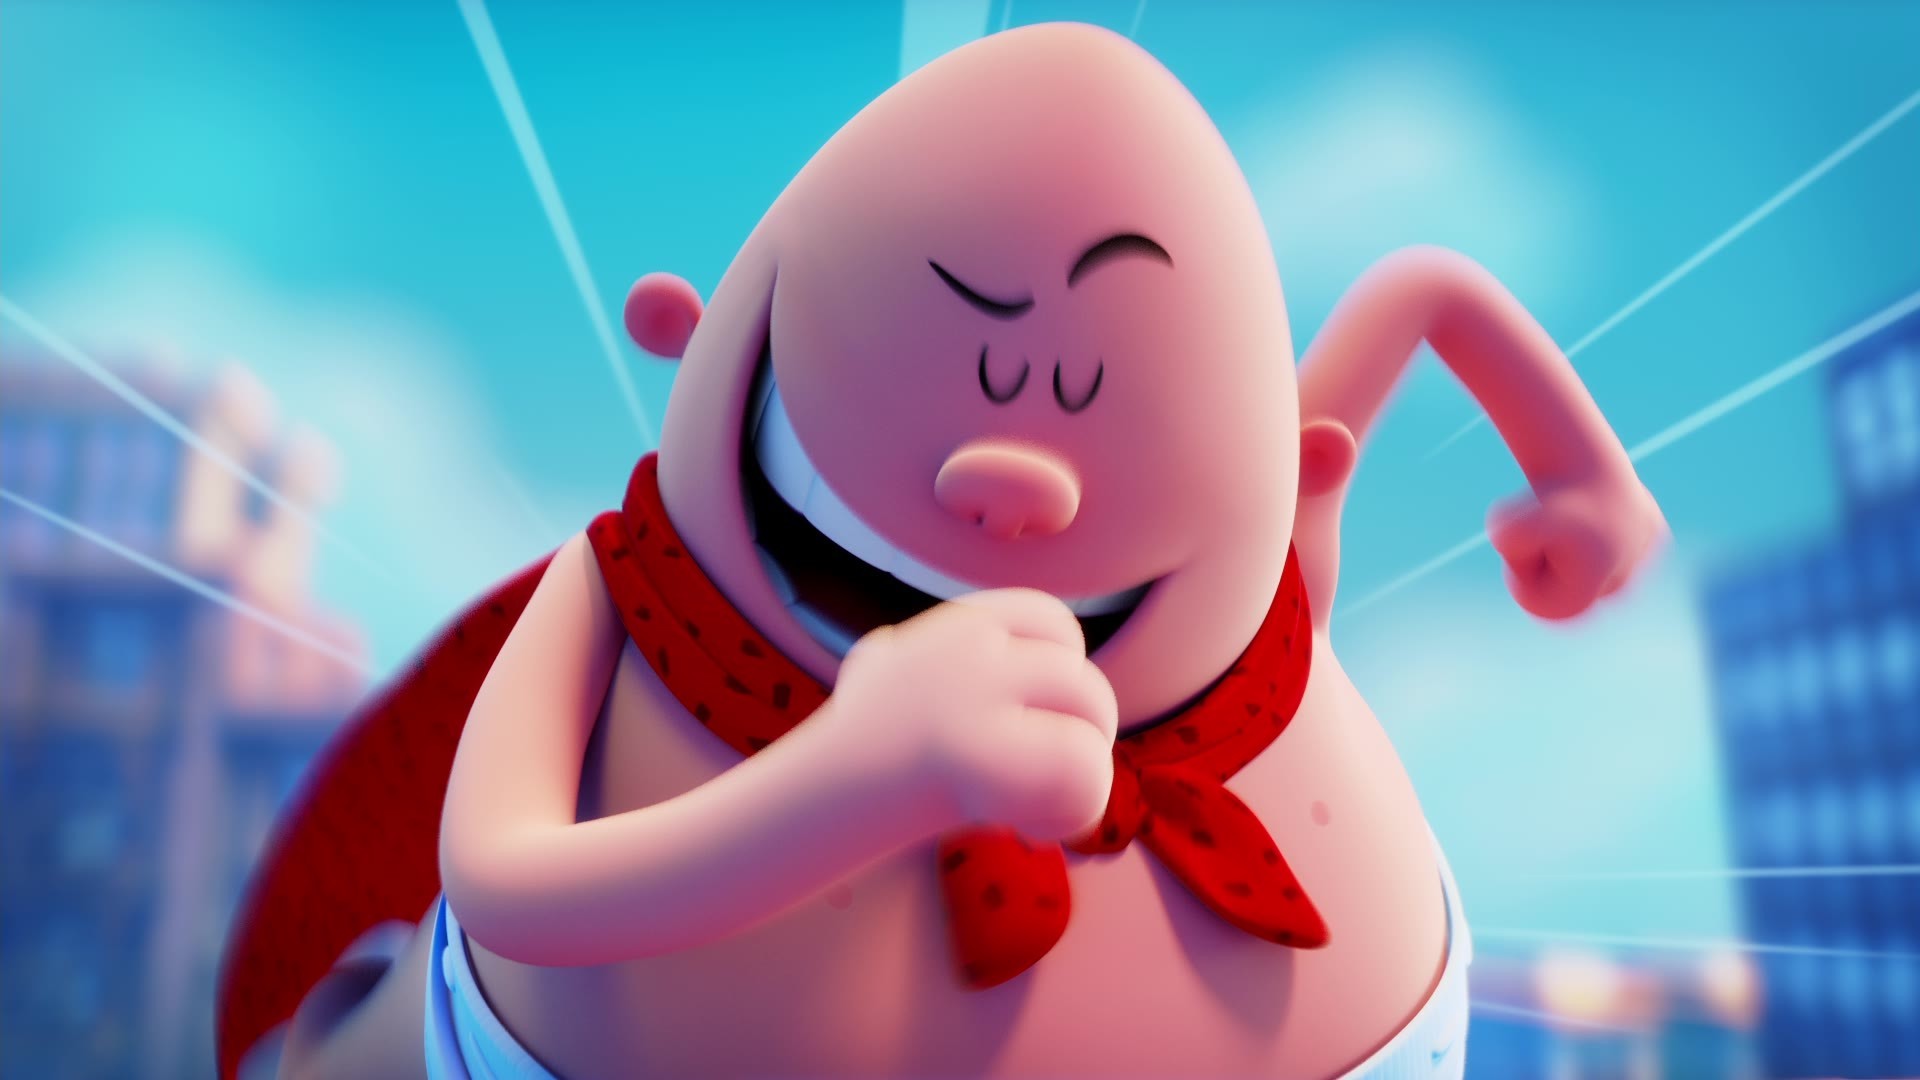 Silly but Serious: The Lessons of “Captain Underpants” | SCENES